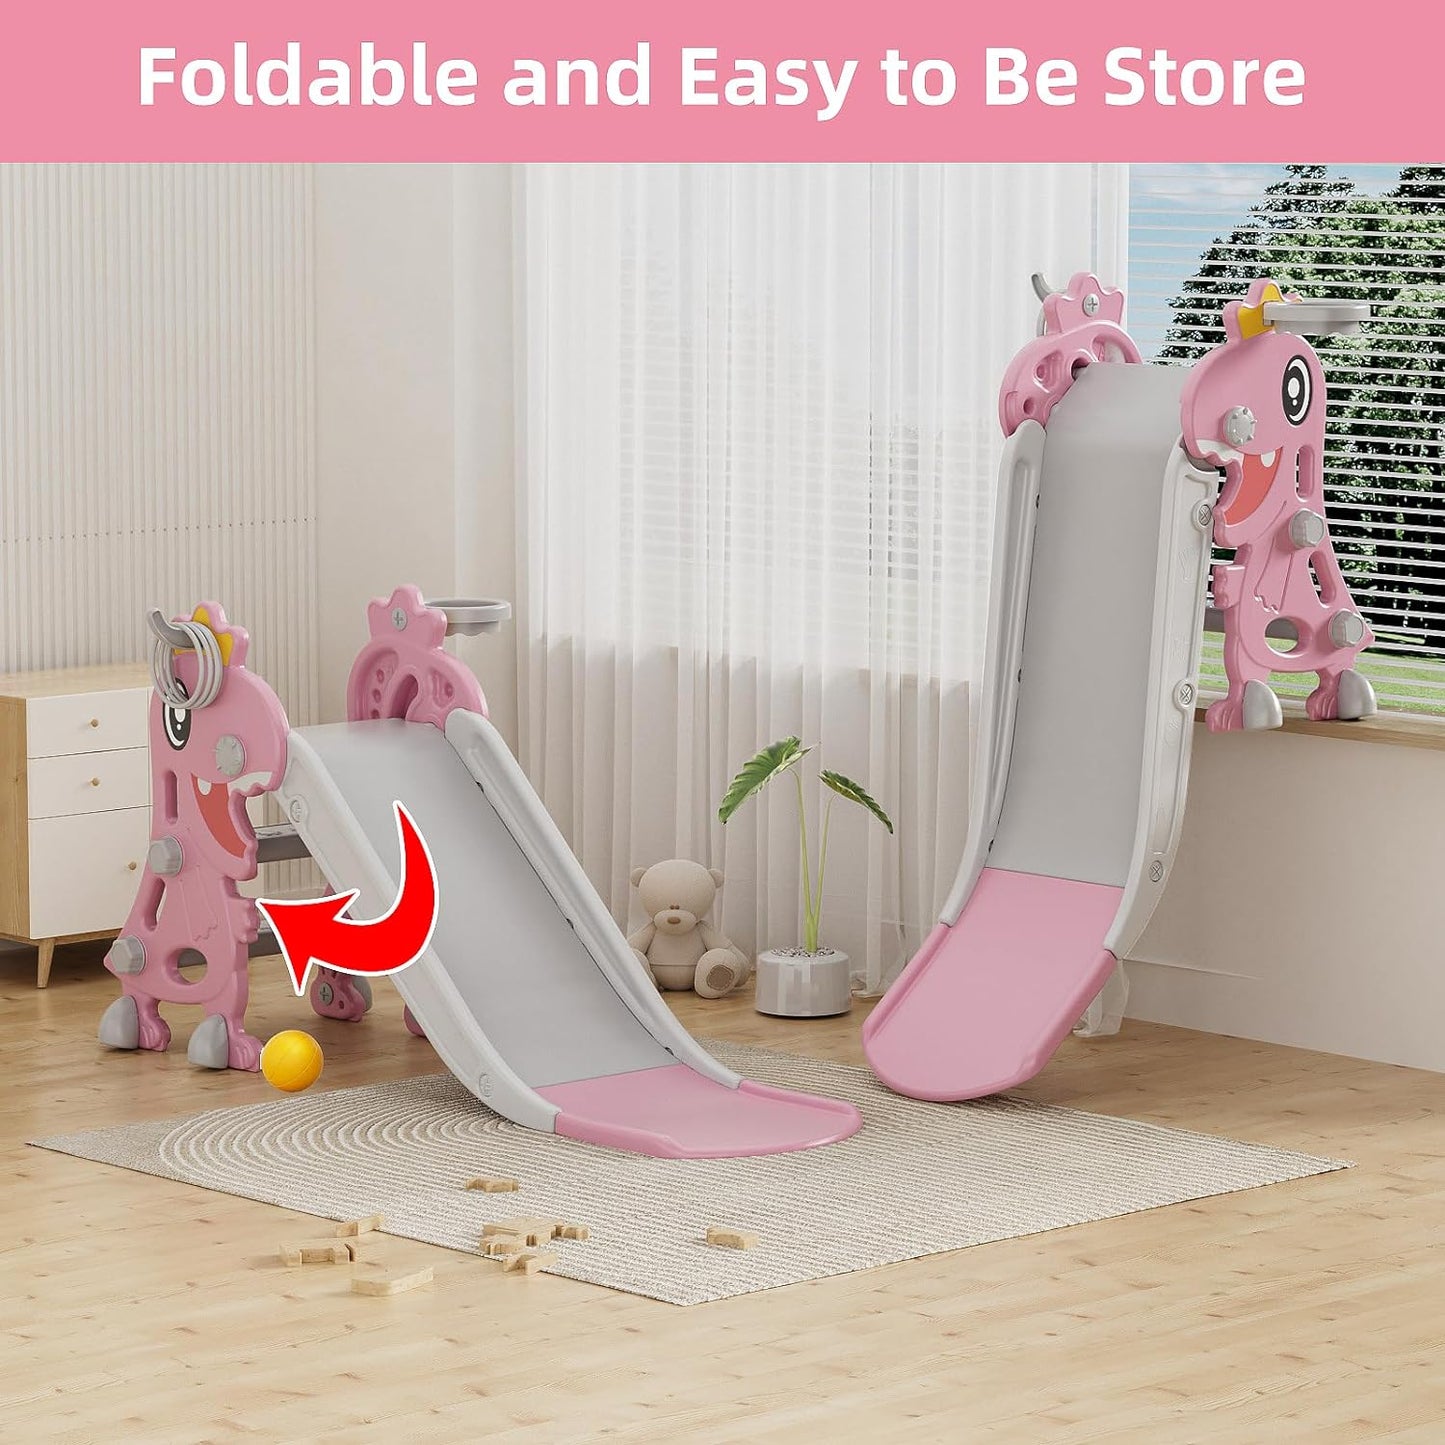 Toddler Slide, 4 in 1 Foldable Indoor Slide for Toddlers Age 1-3, Indoor and Outdoor Playground, Toddler Climber Playset with Basketball Hoop and Ring Toss (Pink)